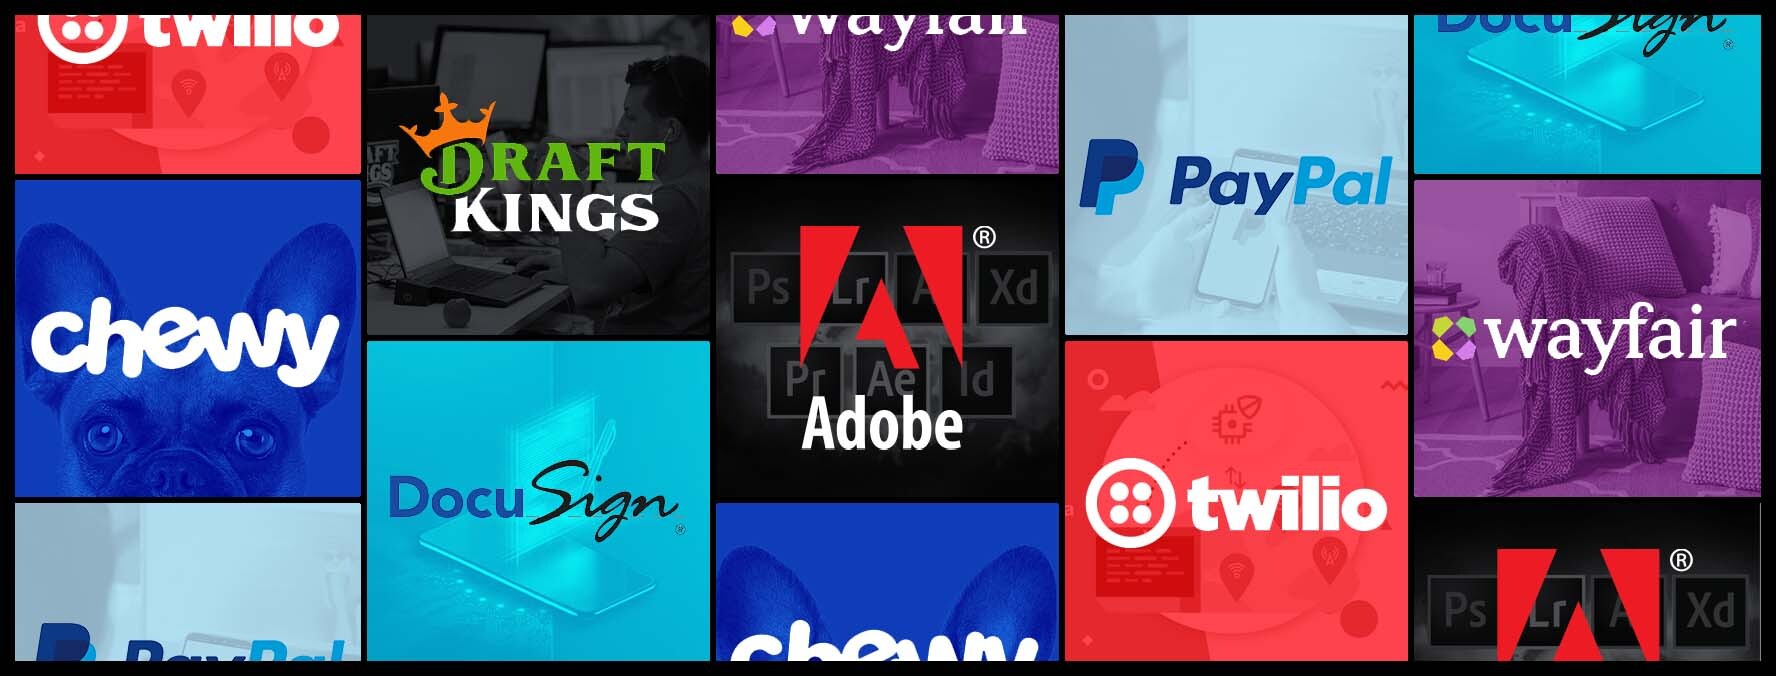 Collage of Logos of the companies: (Left to Right) Chewy, Draft Kings, Docu Sign, Adobe, Twilio, PayPal and Wayfair